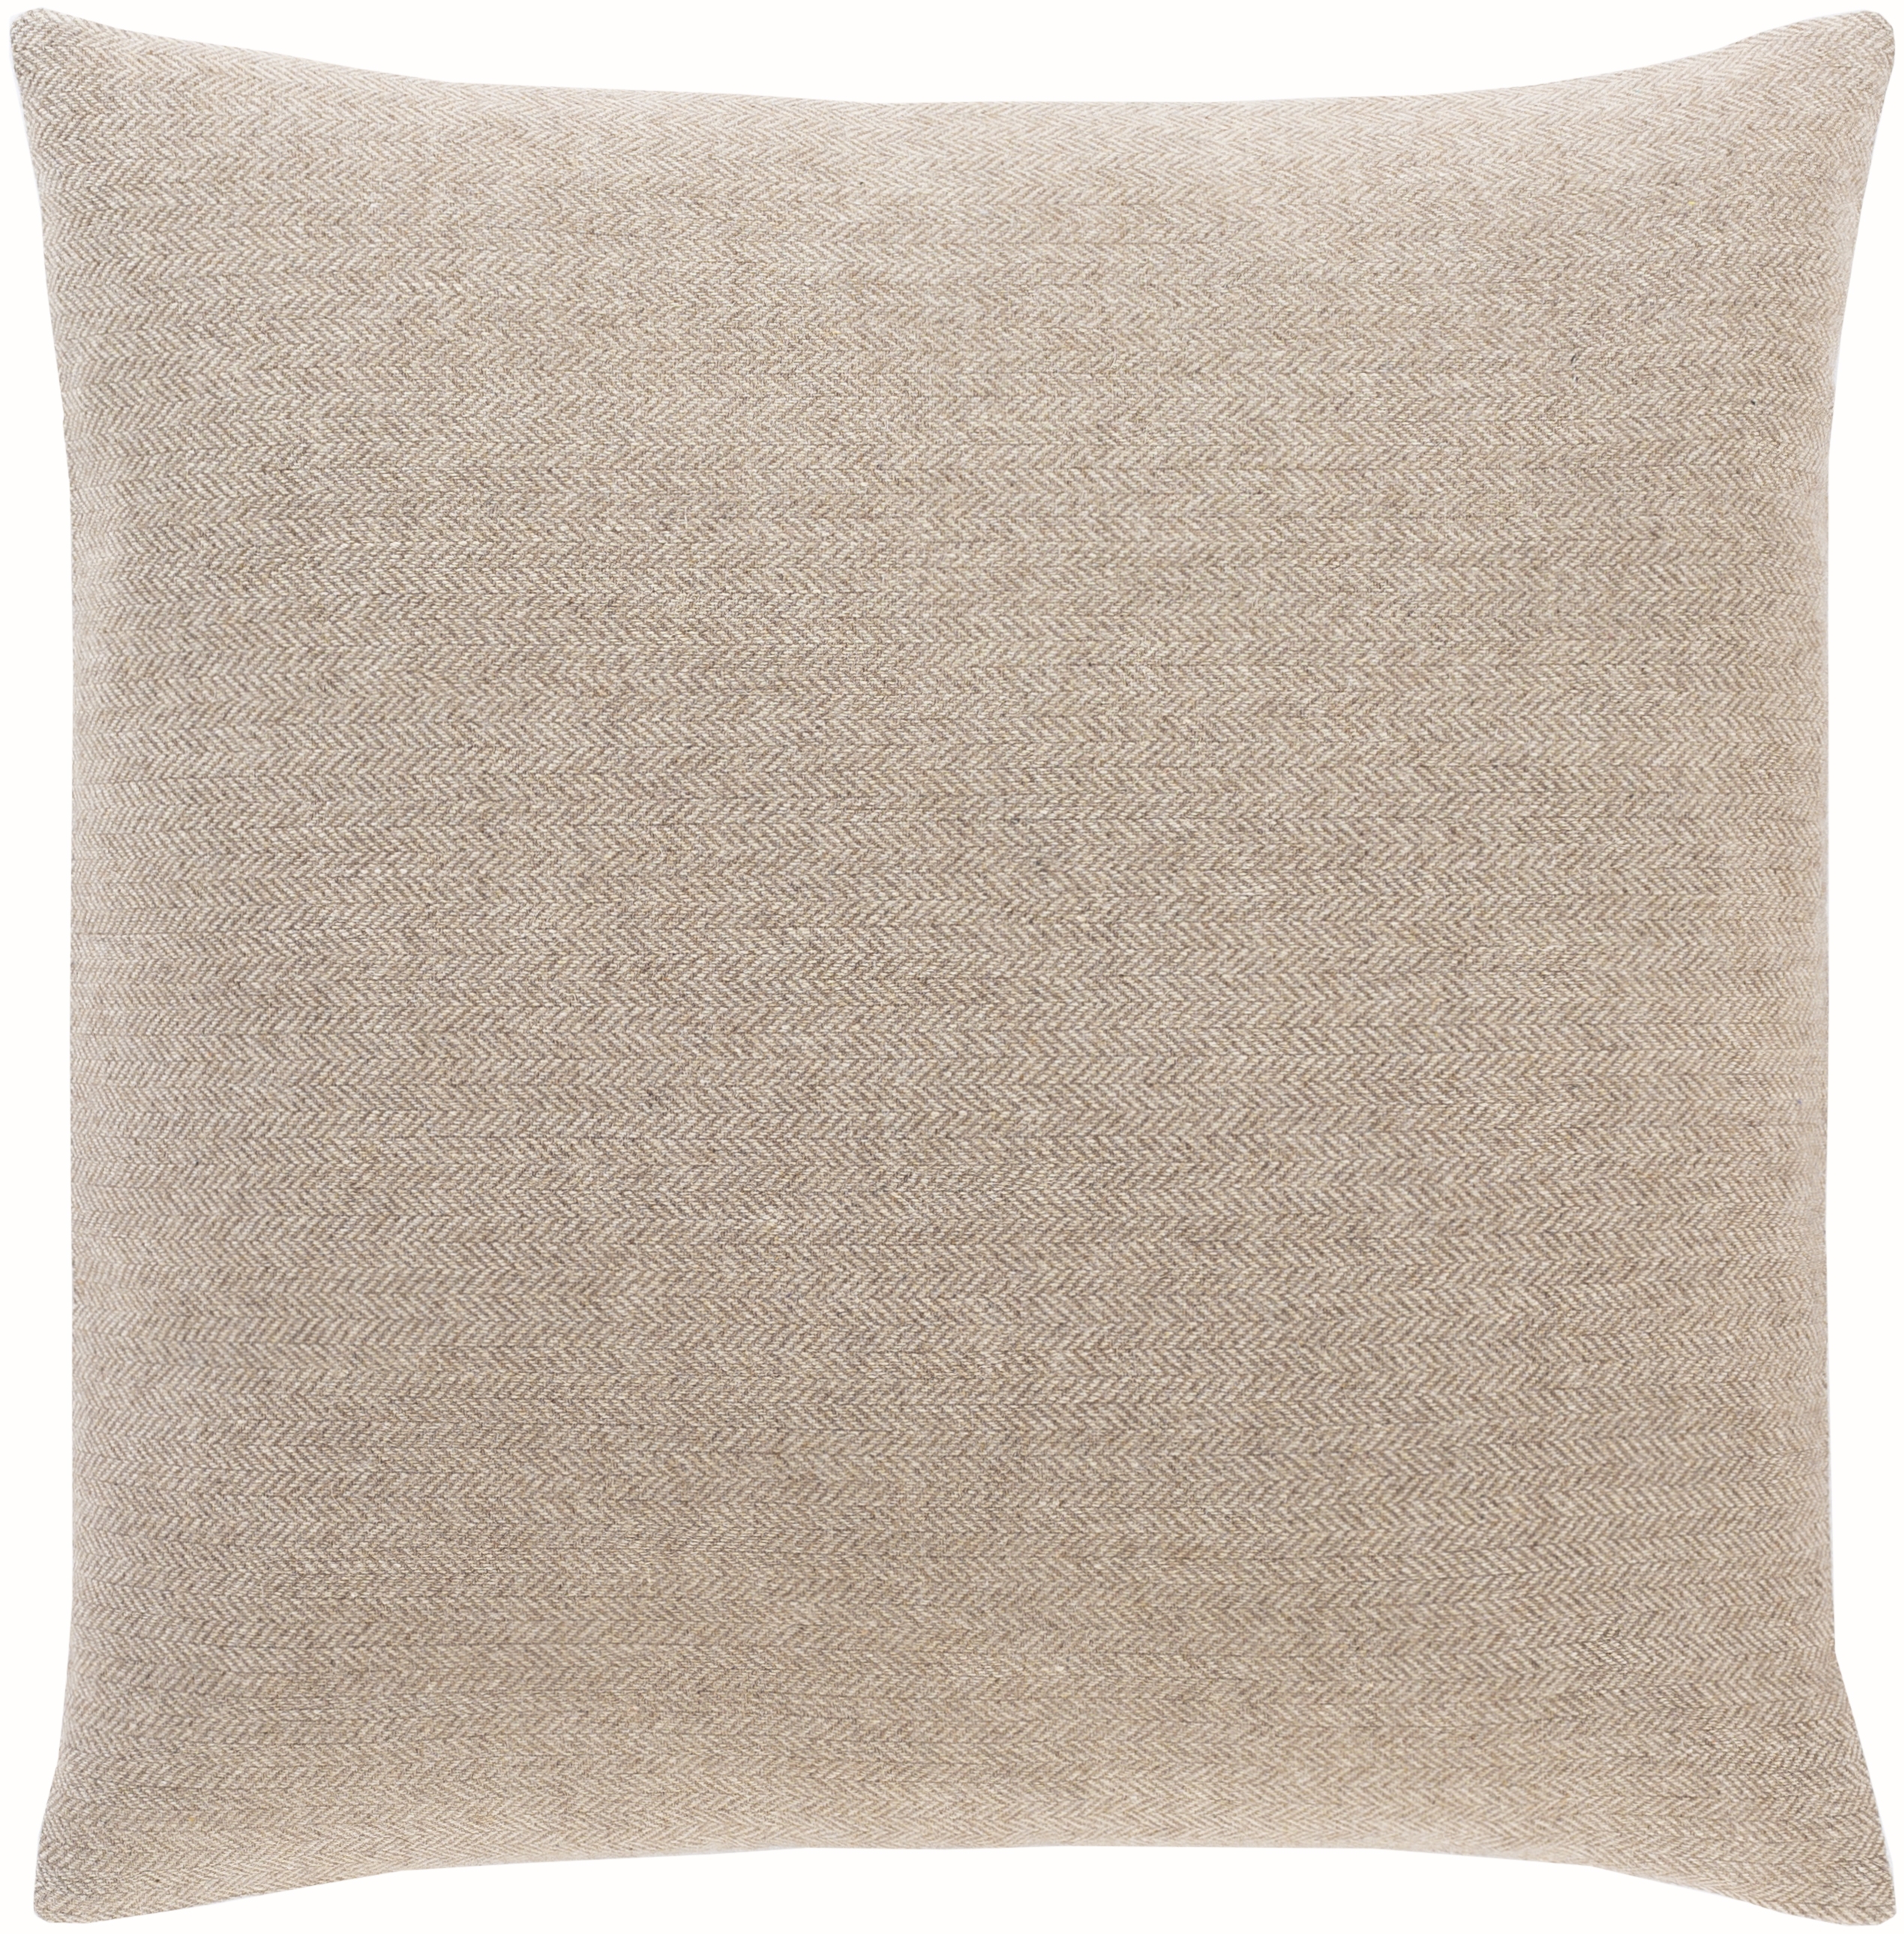 Brenley - BRN-002 - 20" x 20" - pillow cover only - Image 0